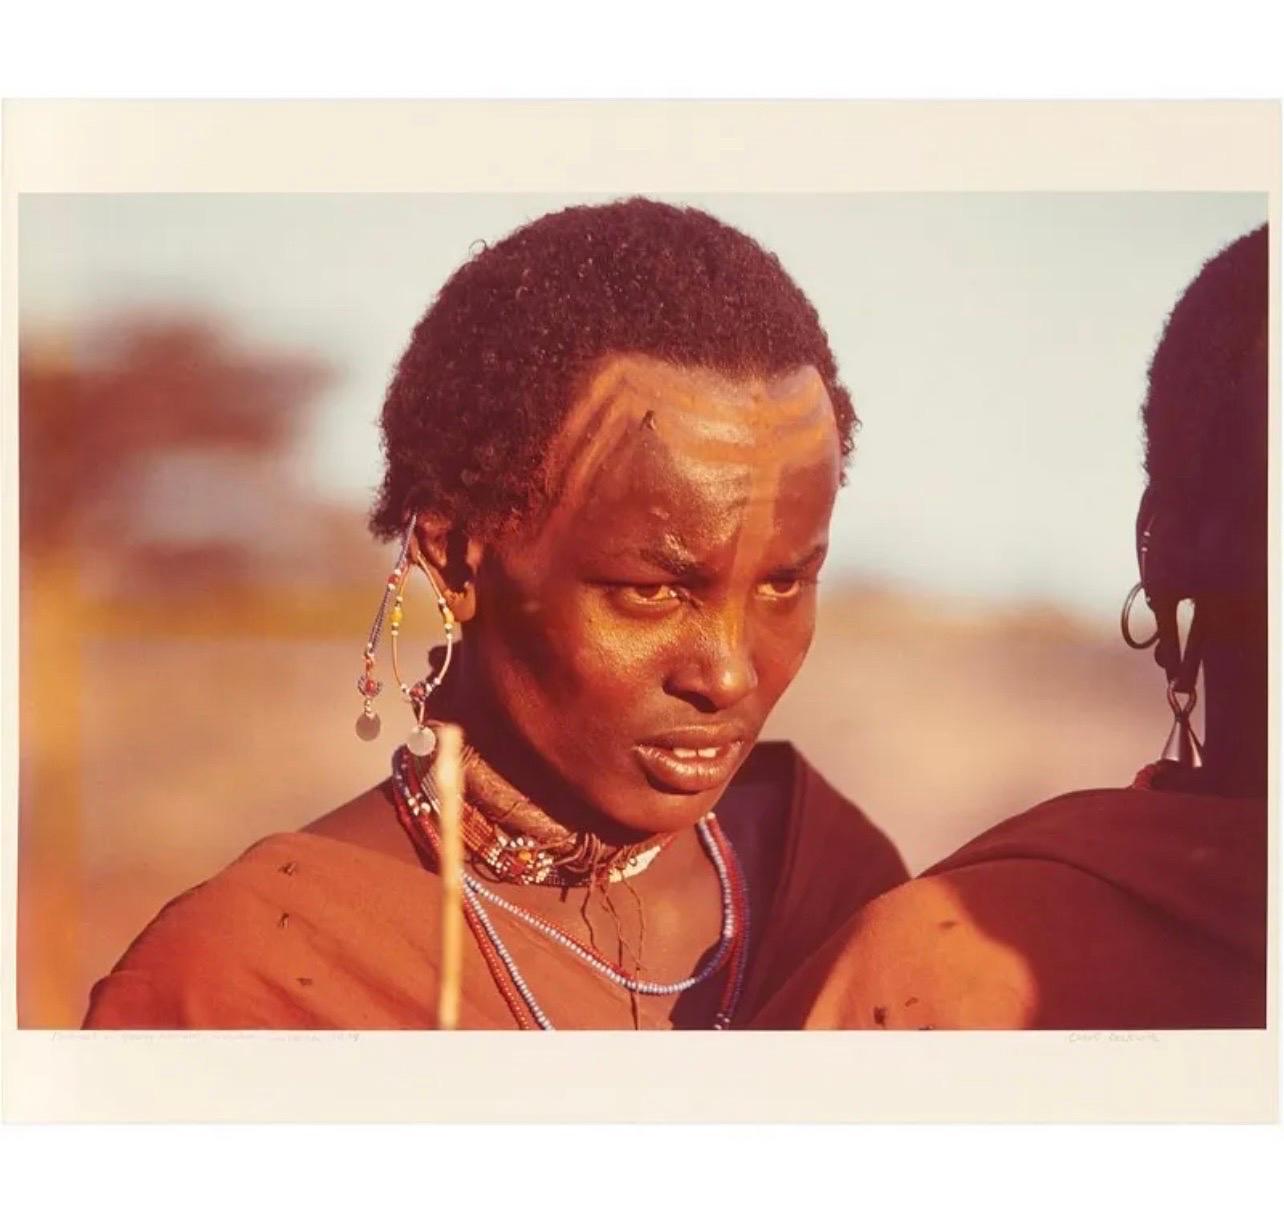 Rare Vintage Color C Print Photograph African Maasai Warrior Chromogenic Photo  - Red Portrait Photograph by Carol Beckwith